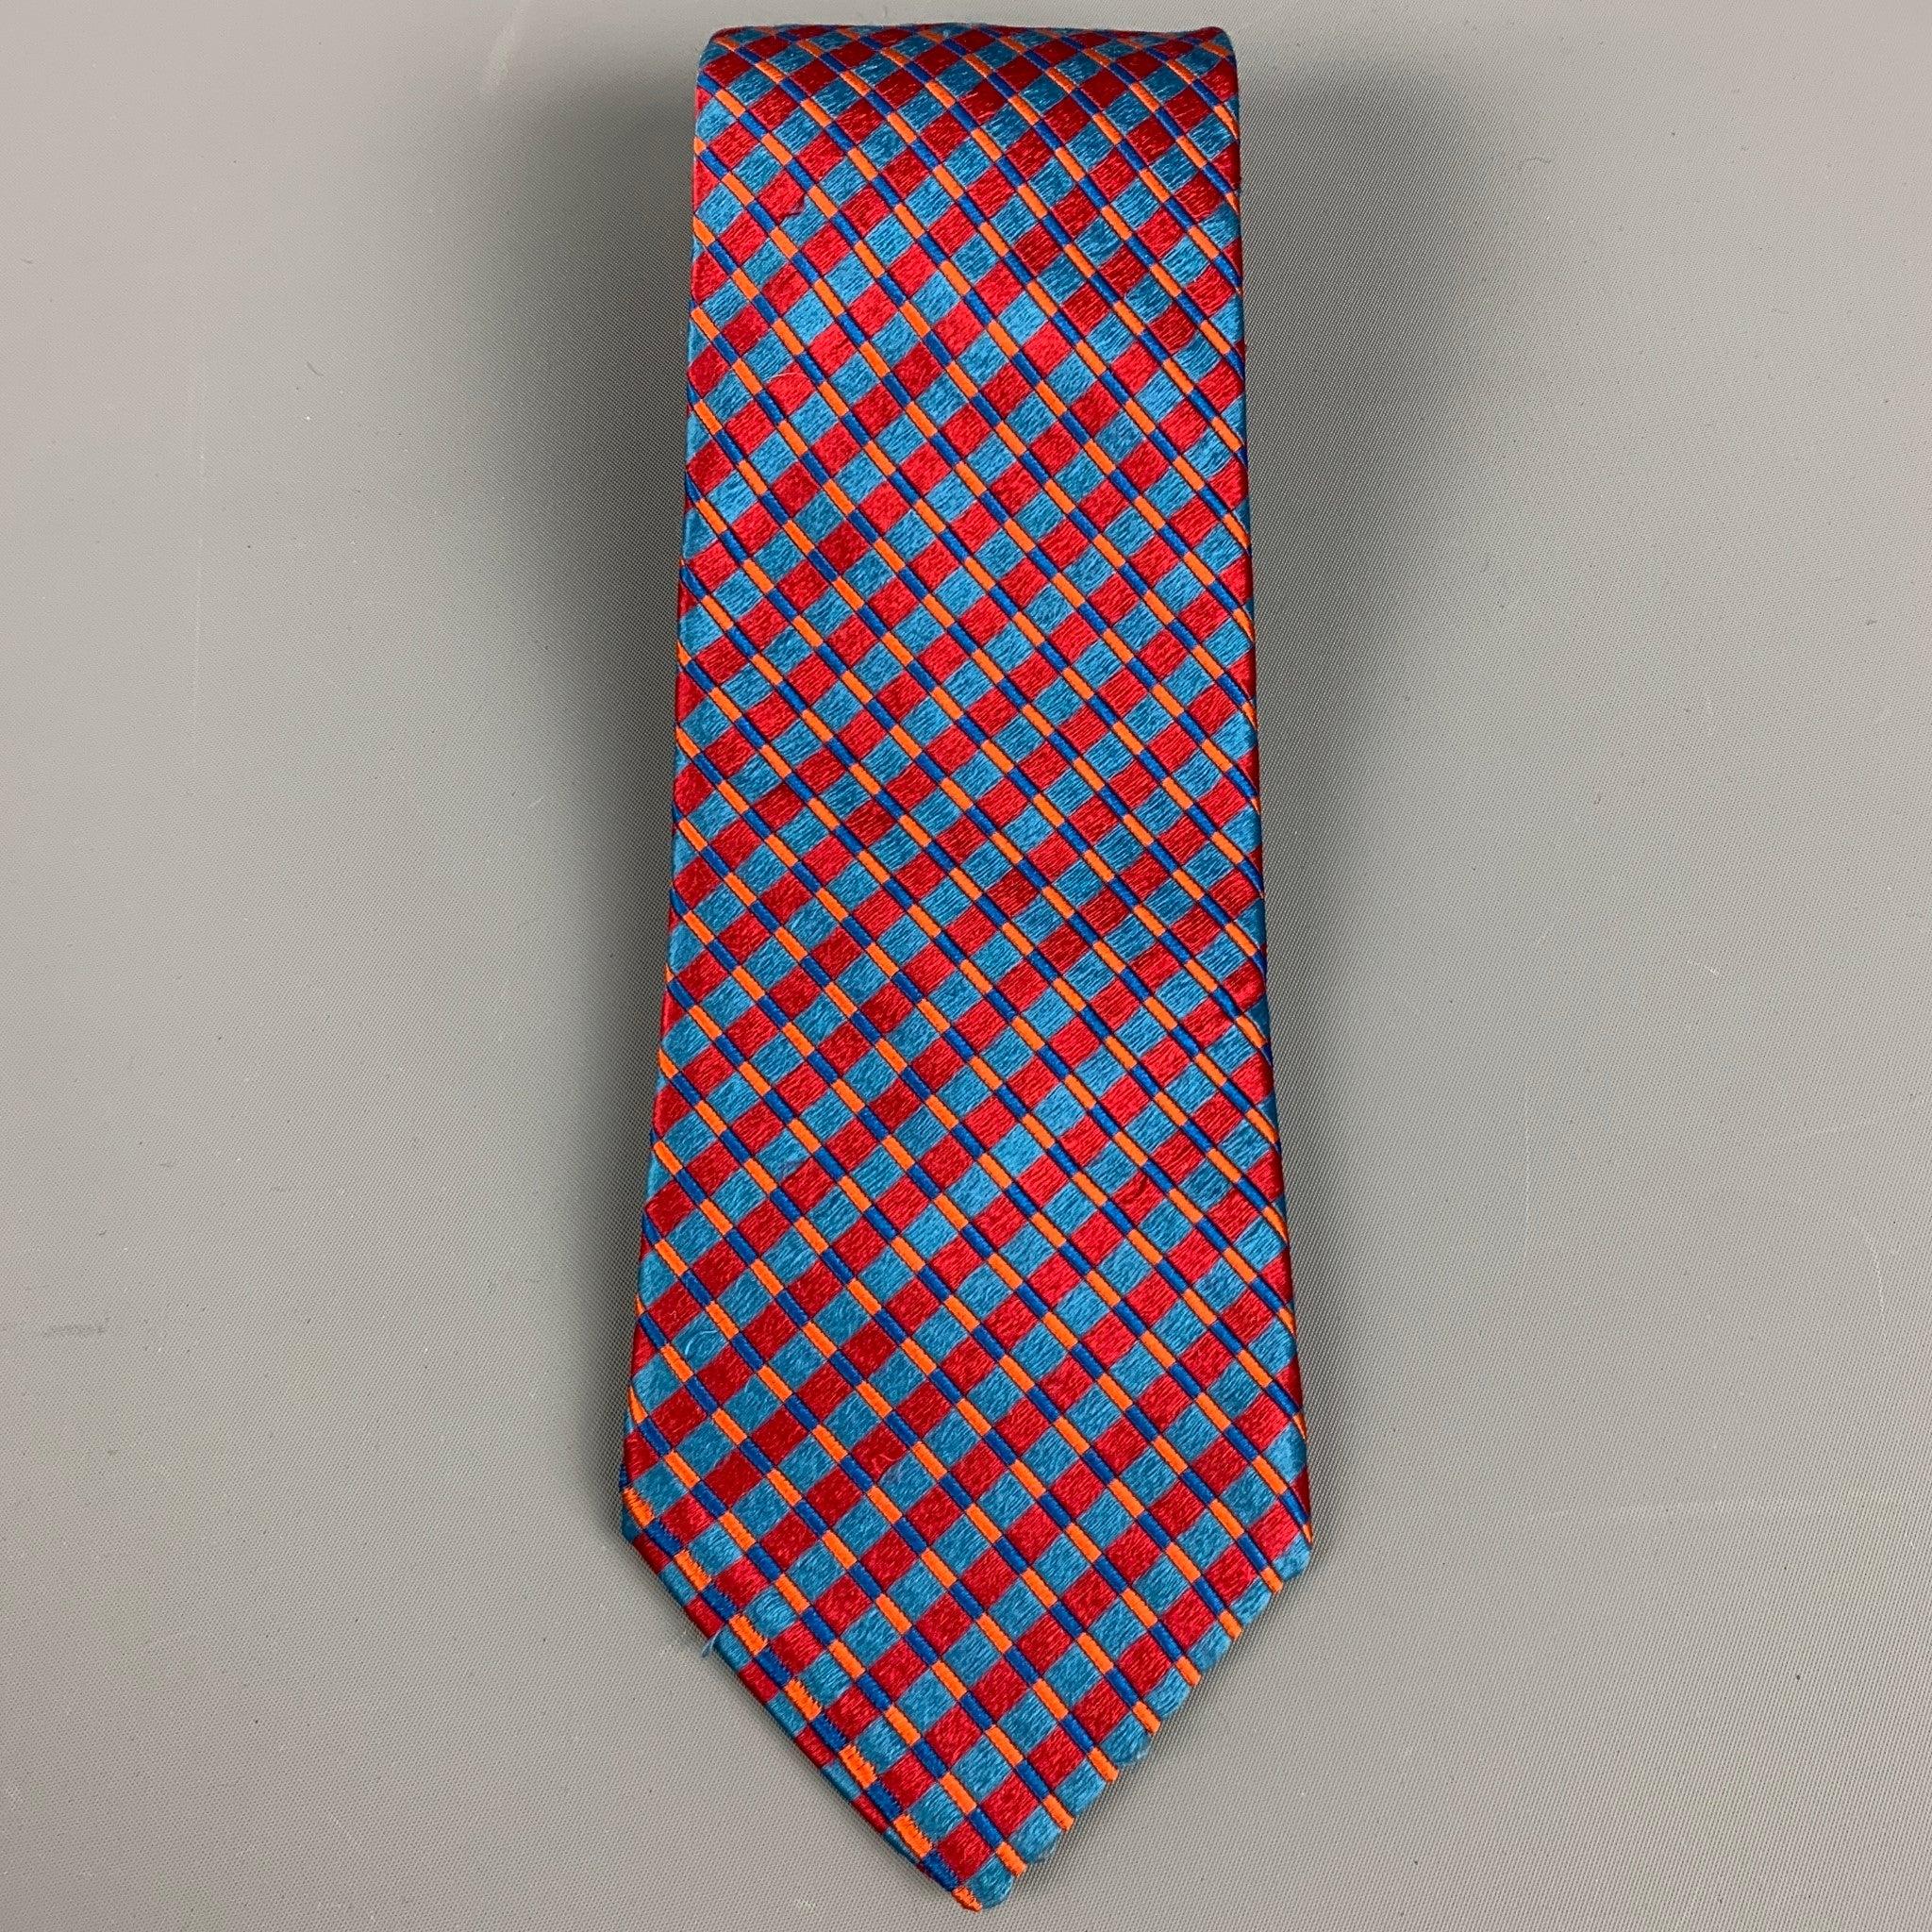 ERMENEGILDO ZEGNA
necktie in a
red and blue silk satin featuring vibrant rhombus jacquard pattern. Made in Italy.Very Good Pre-Owned Condition. Minor signs of wear. 

Measurements: 
  Width: 3.5 inches Length: 60 inches 
  
  
 
Reference: